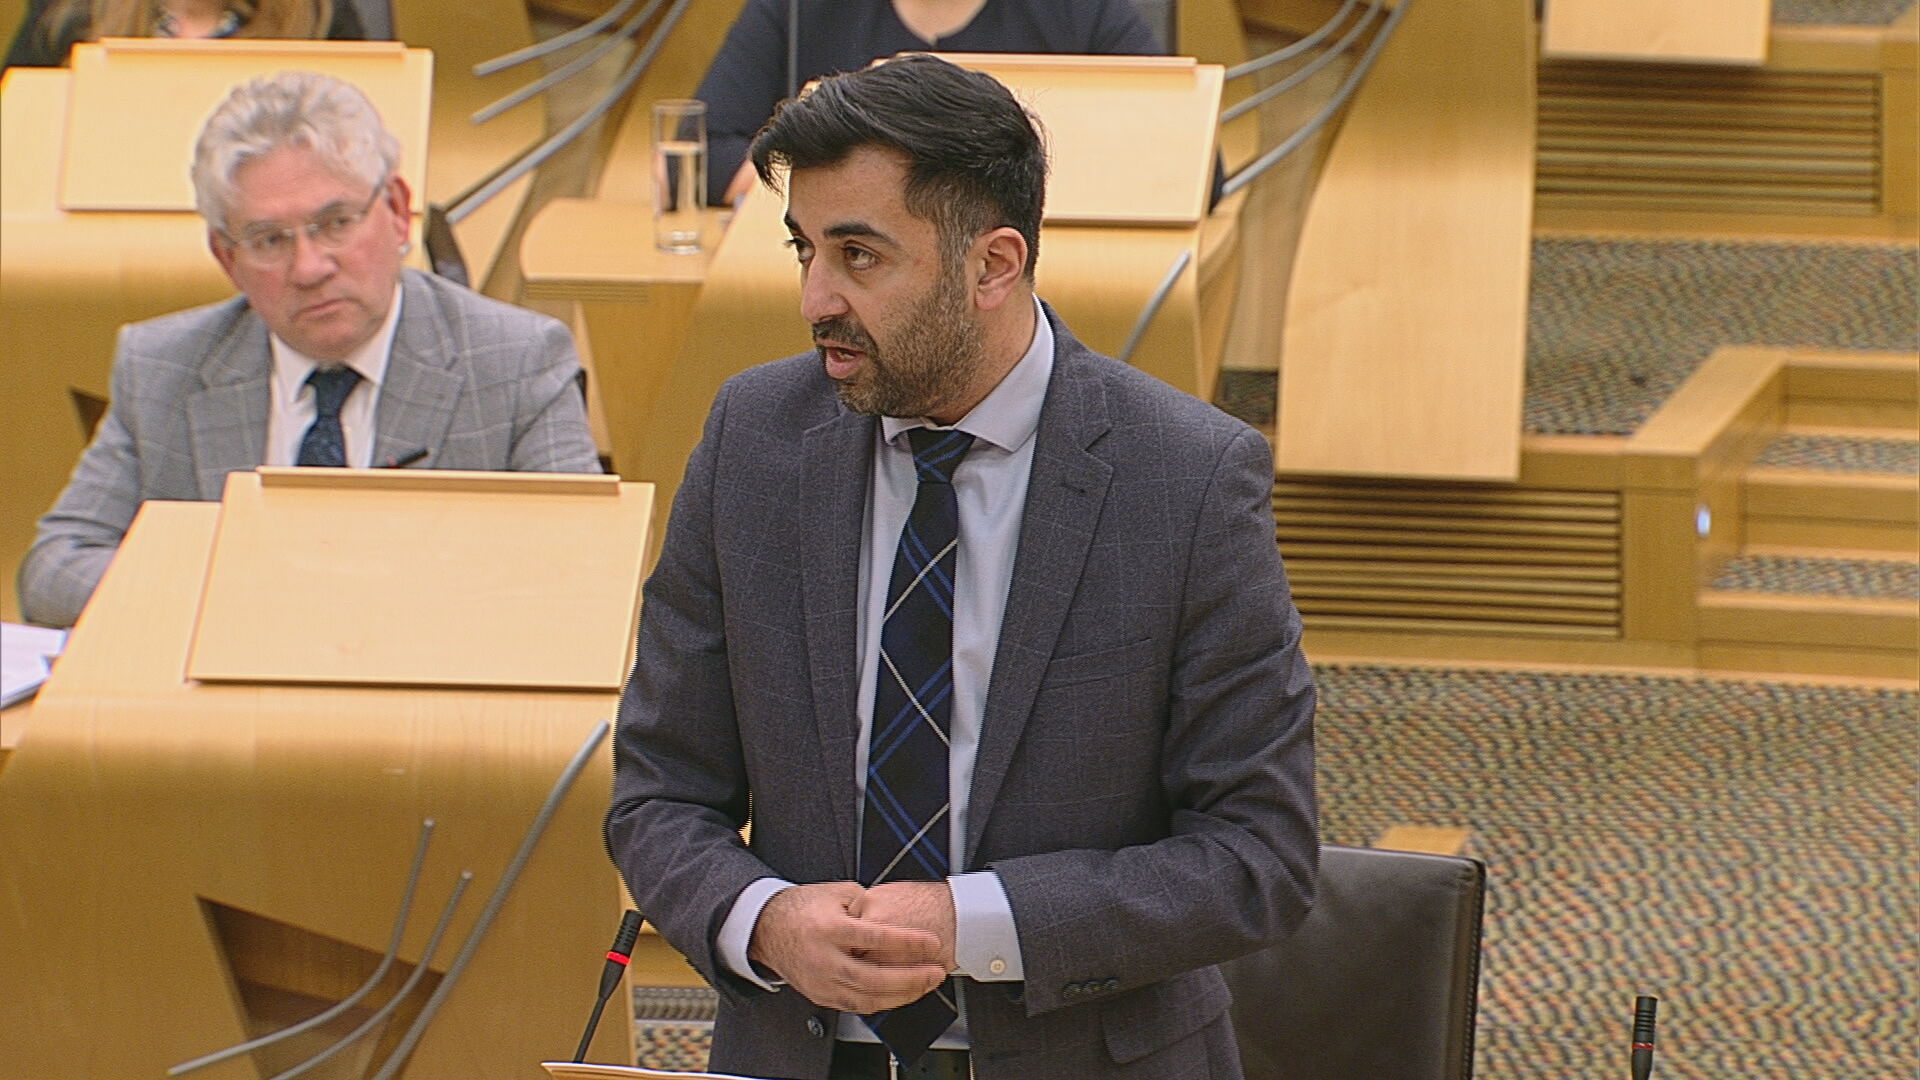 Throughout the SNP leadership campaign, Humza Yousaf said he was prepared to take the UK Government to court.